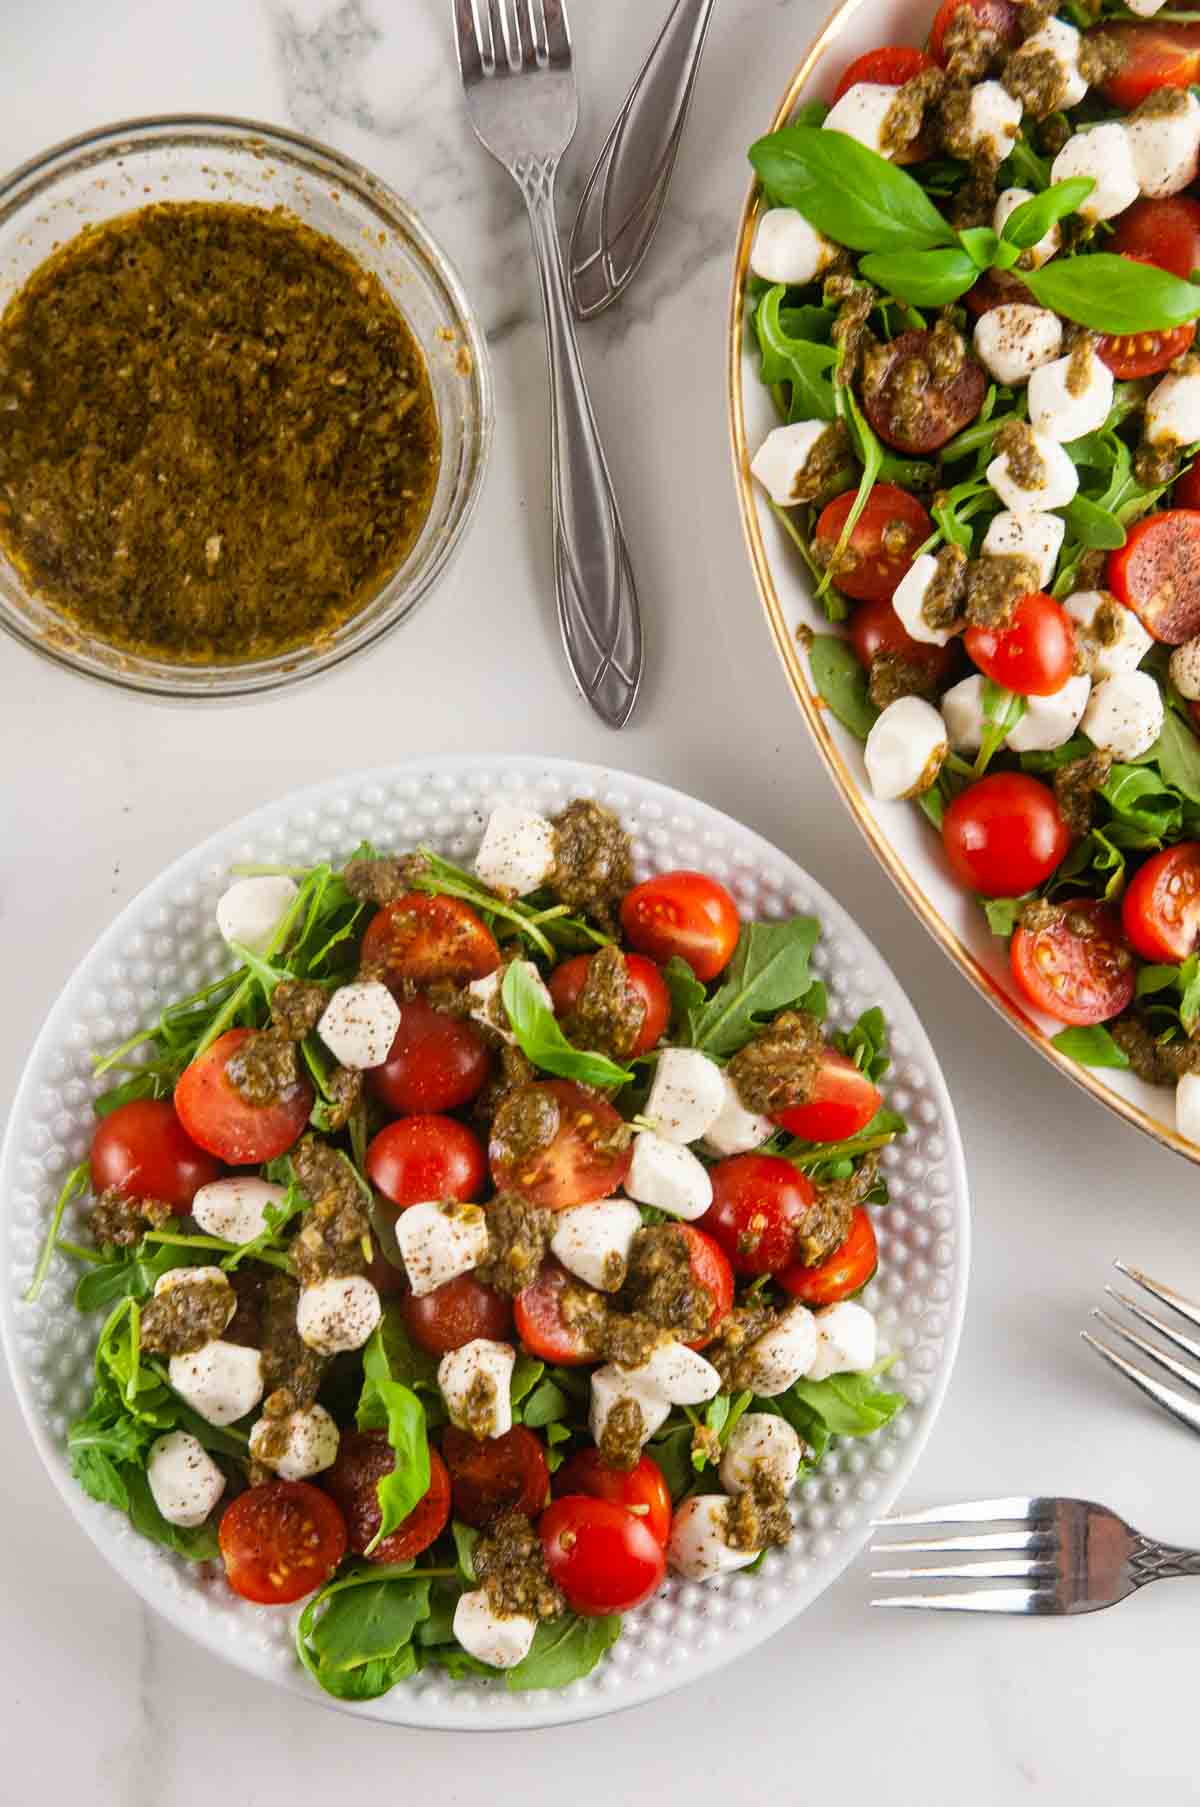 Easy pesto Caprese salad features creamy fresh mozzarella, sweet cherry tomatoes, and aromatic basil all served over sharp arugula and drizzled with lemon pesto.